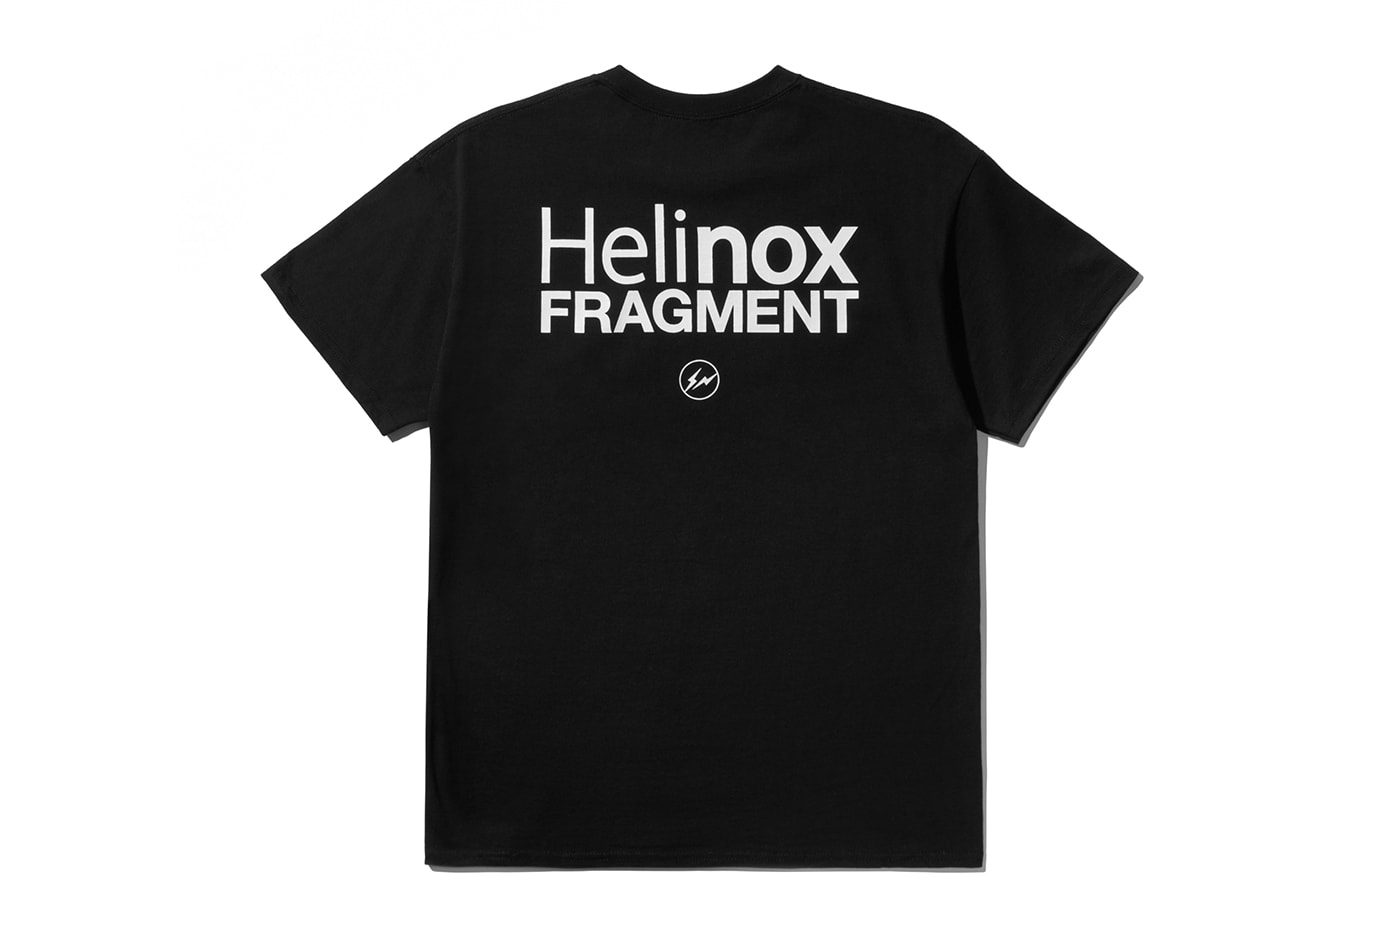 Helinox fragment design Limited-Edition T-shirt Collaboration HCC Busan Release Info